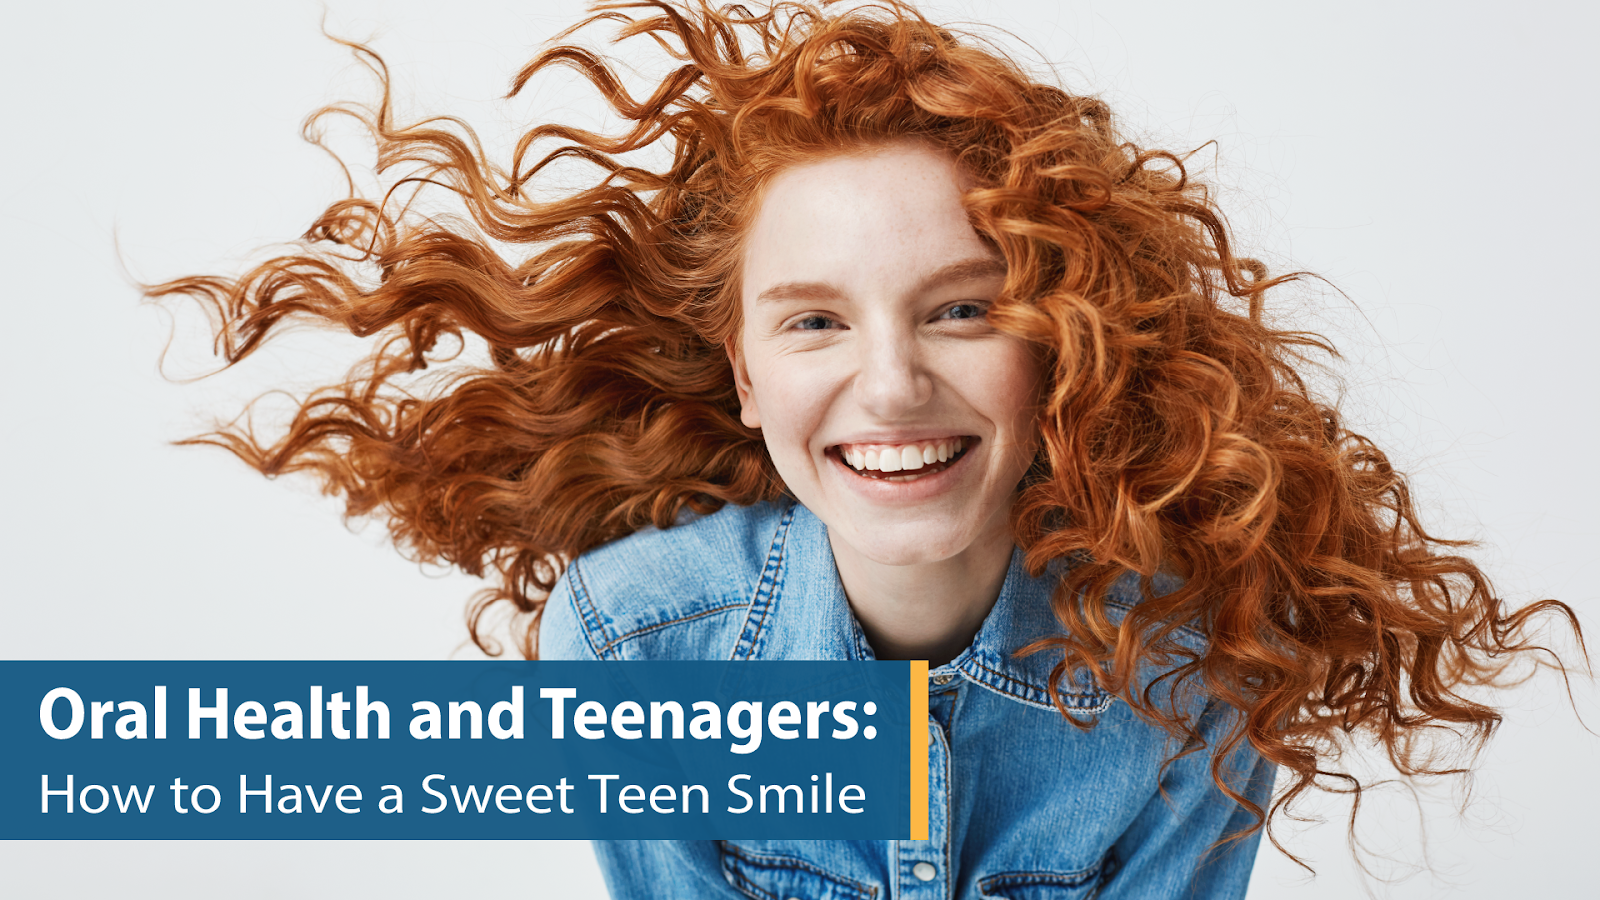 Oral Health and Teenagers: How to Have a Sweet Teen Smile